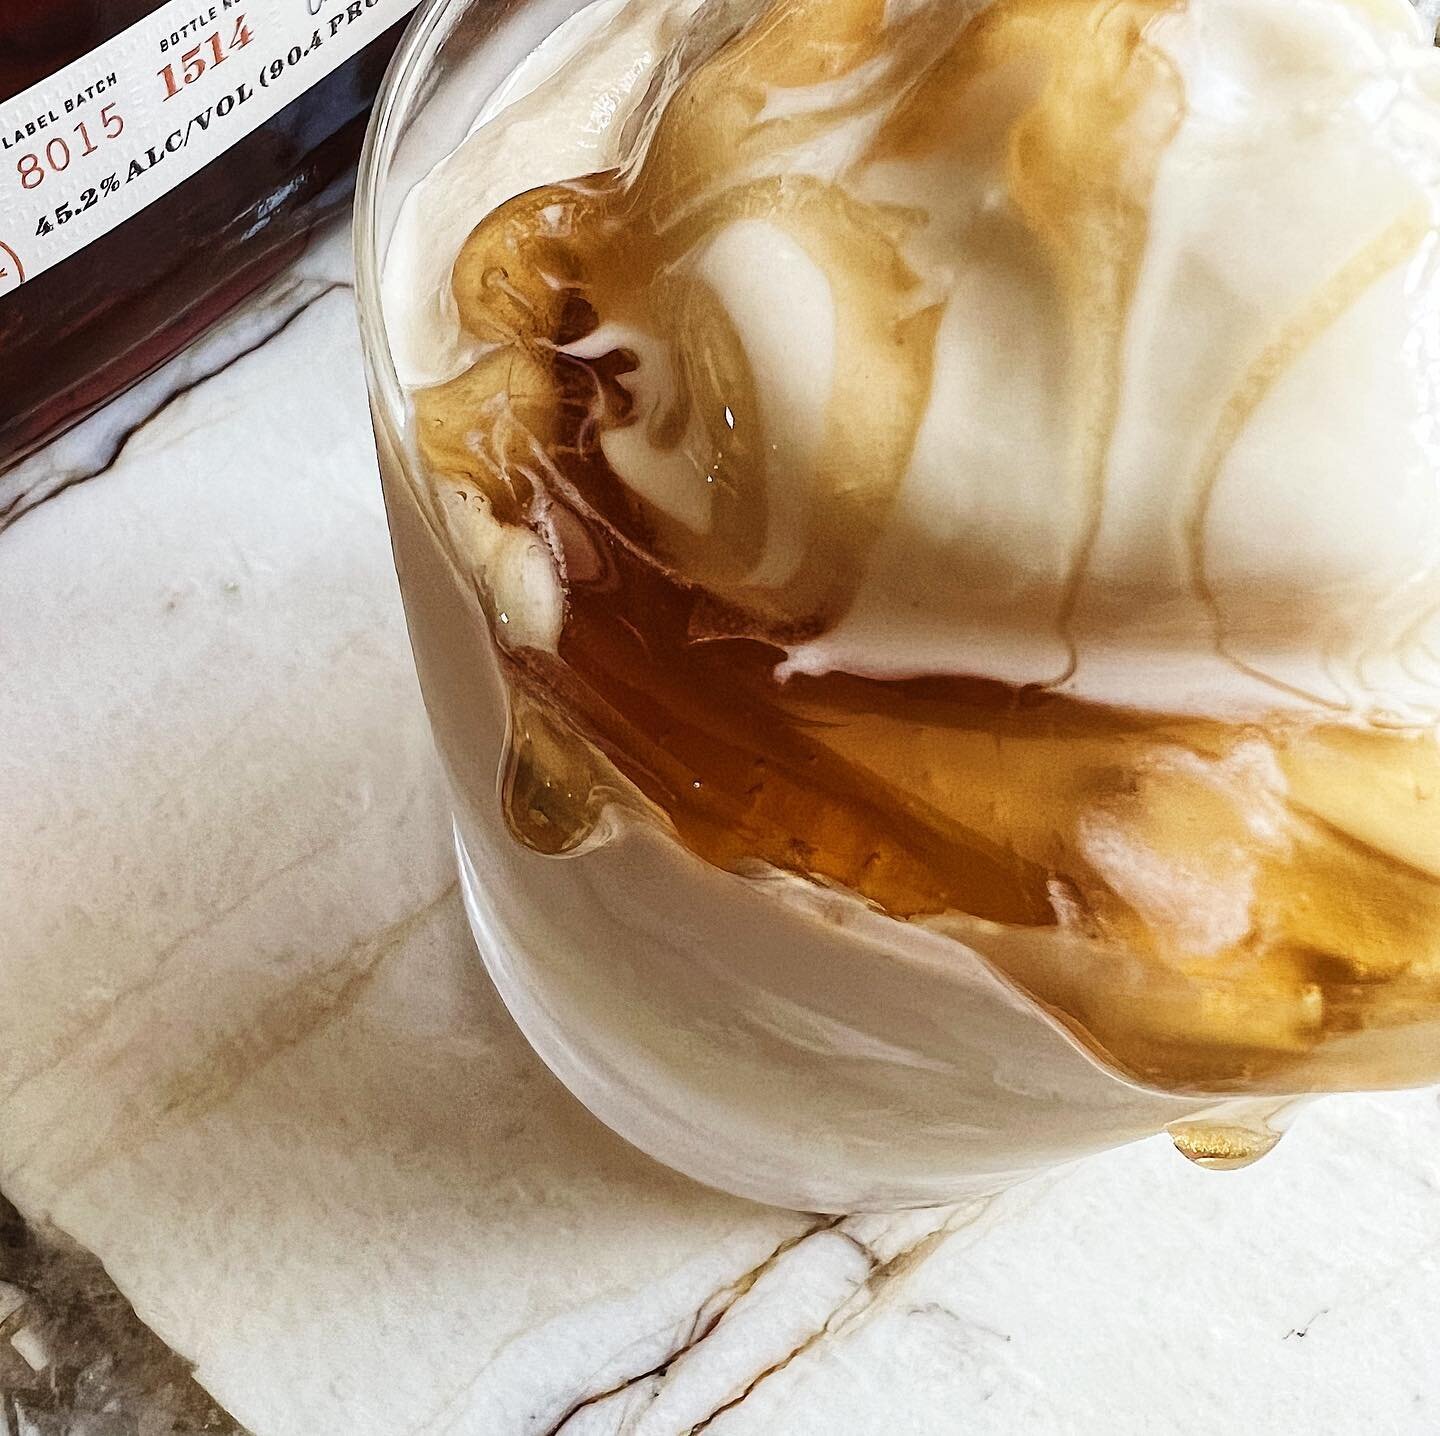 Here&rsquo;s a close up of one of our seasonal flavors, Maple Bourbon. This is one of our fan favorites! Which is your favorite? Let us know in the comments below! 👇🏼 #arubafreeze #maple #bourbon #icecreamlover #nitrogenicecream